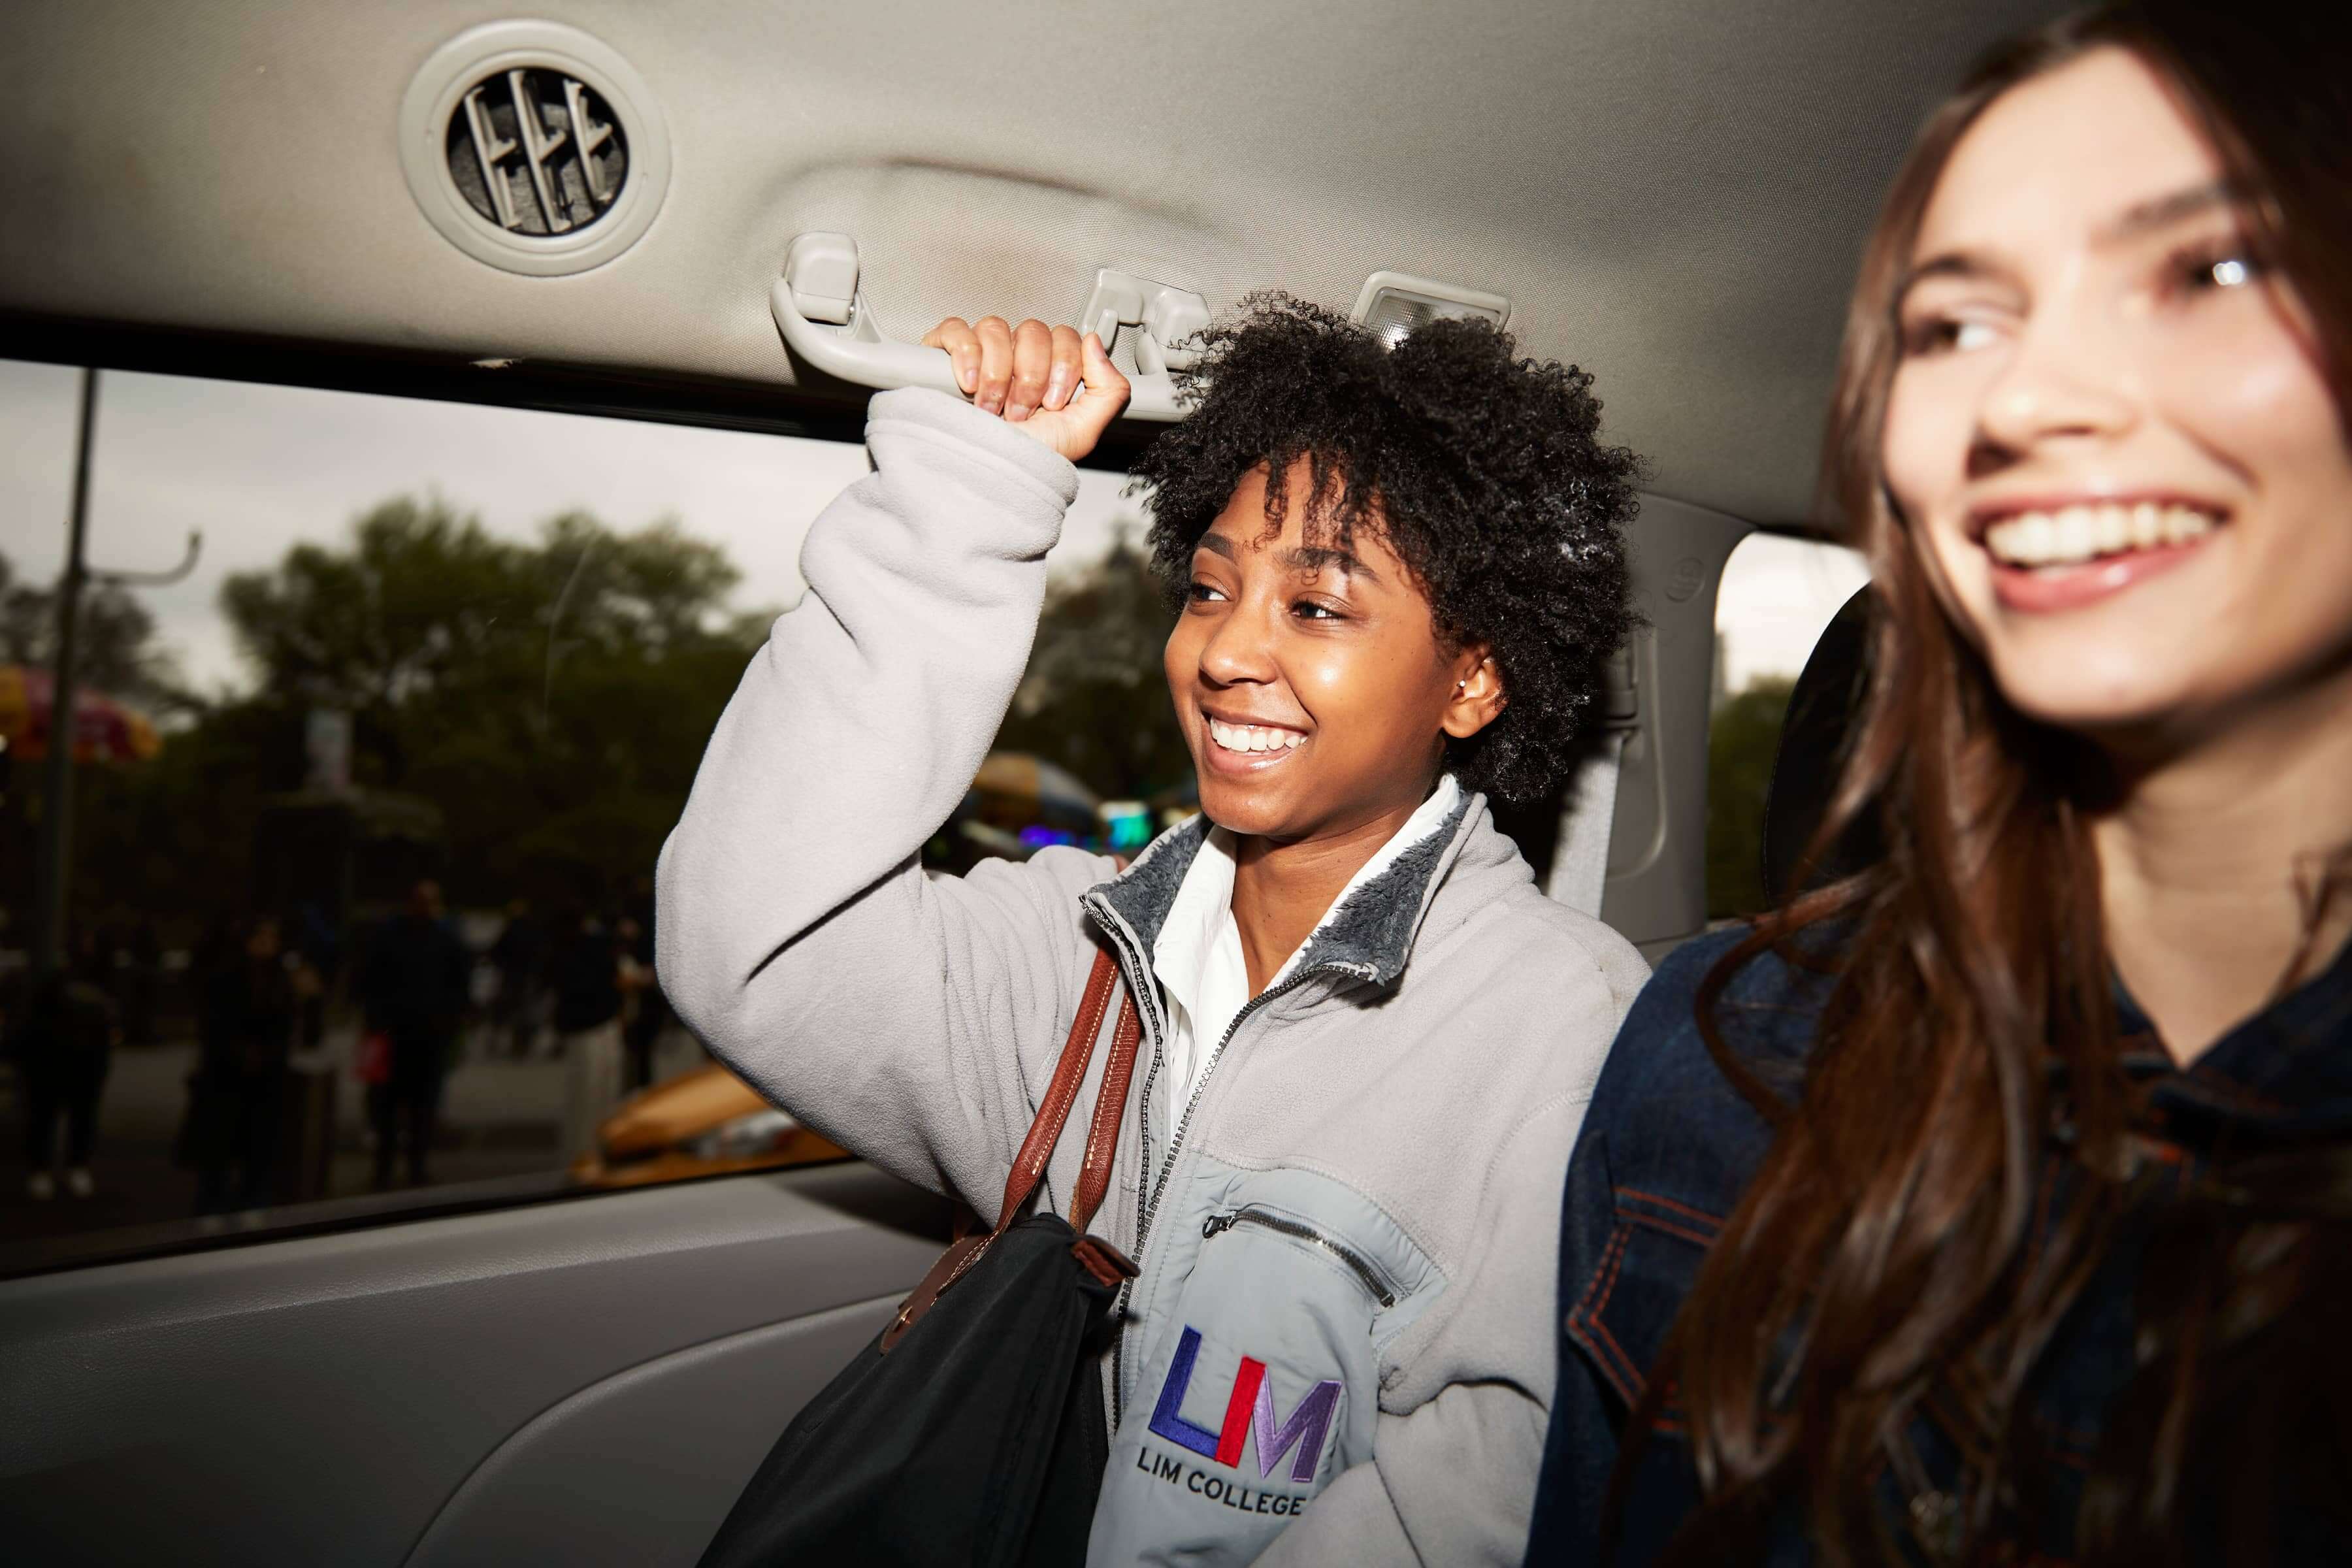 Two LIM students share a taxi in the busy streets of New York City. One student wears an LIM jacket